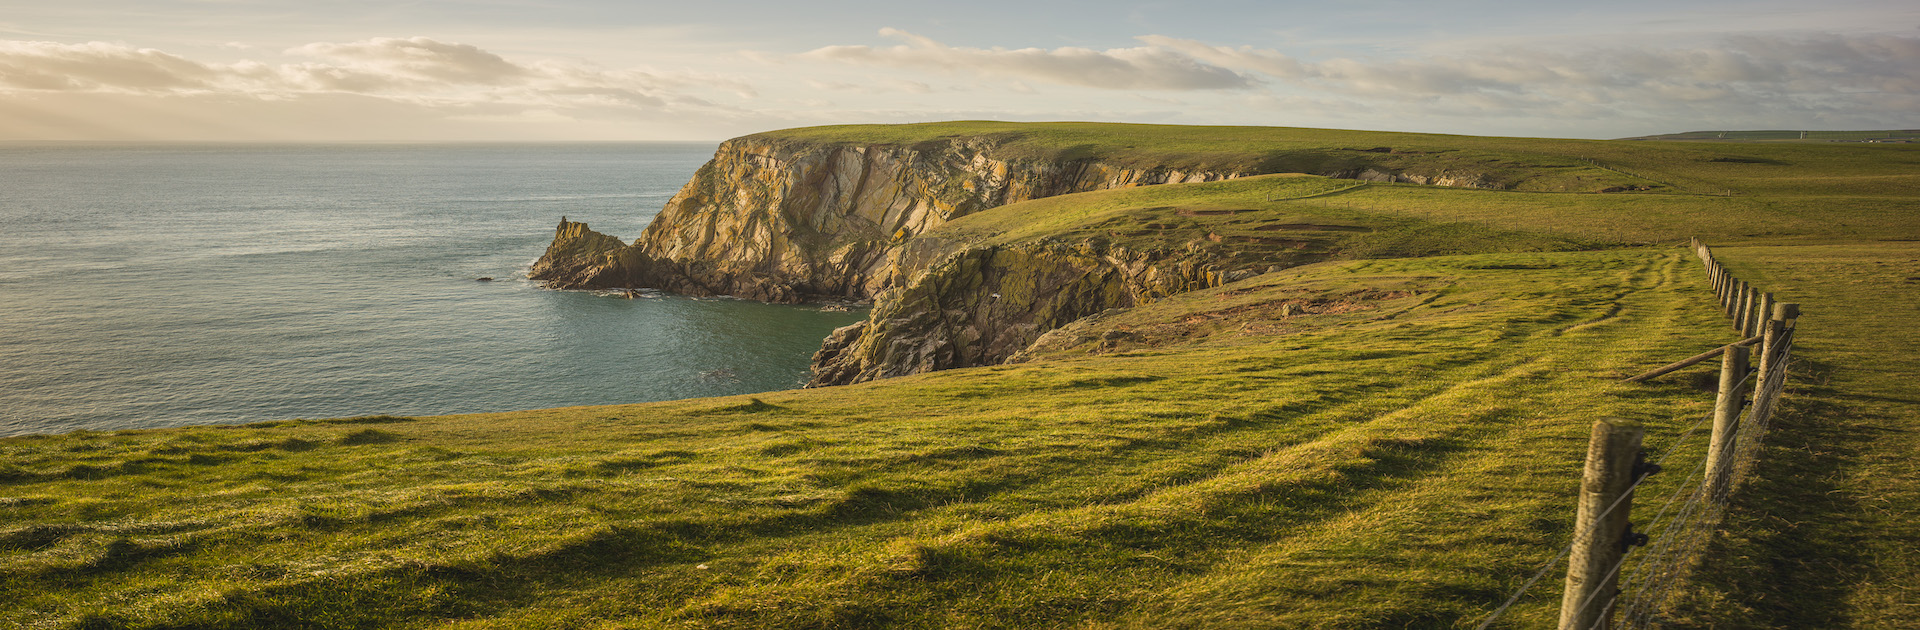 A stunning view of green cliffs over the coast which can be seen on a visit Dumfries and Galloway.